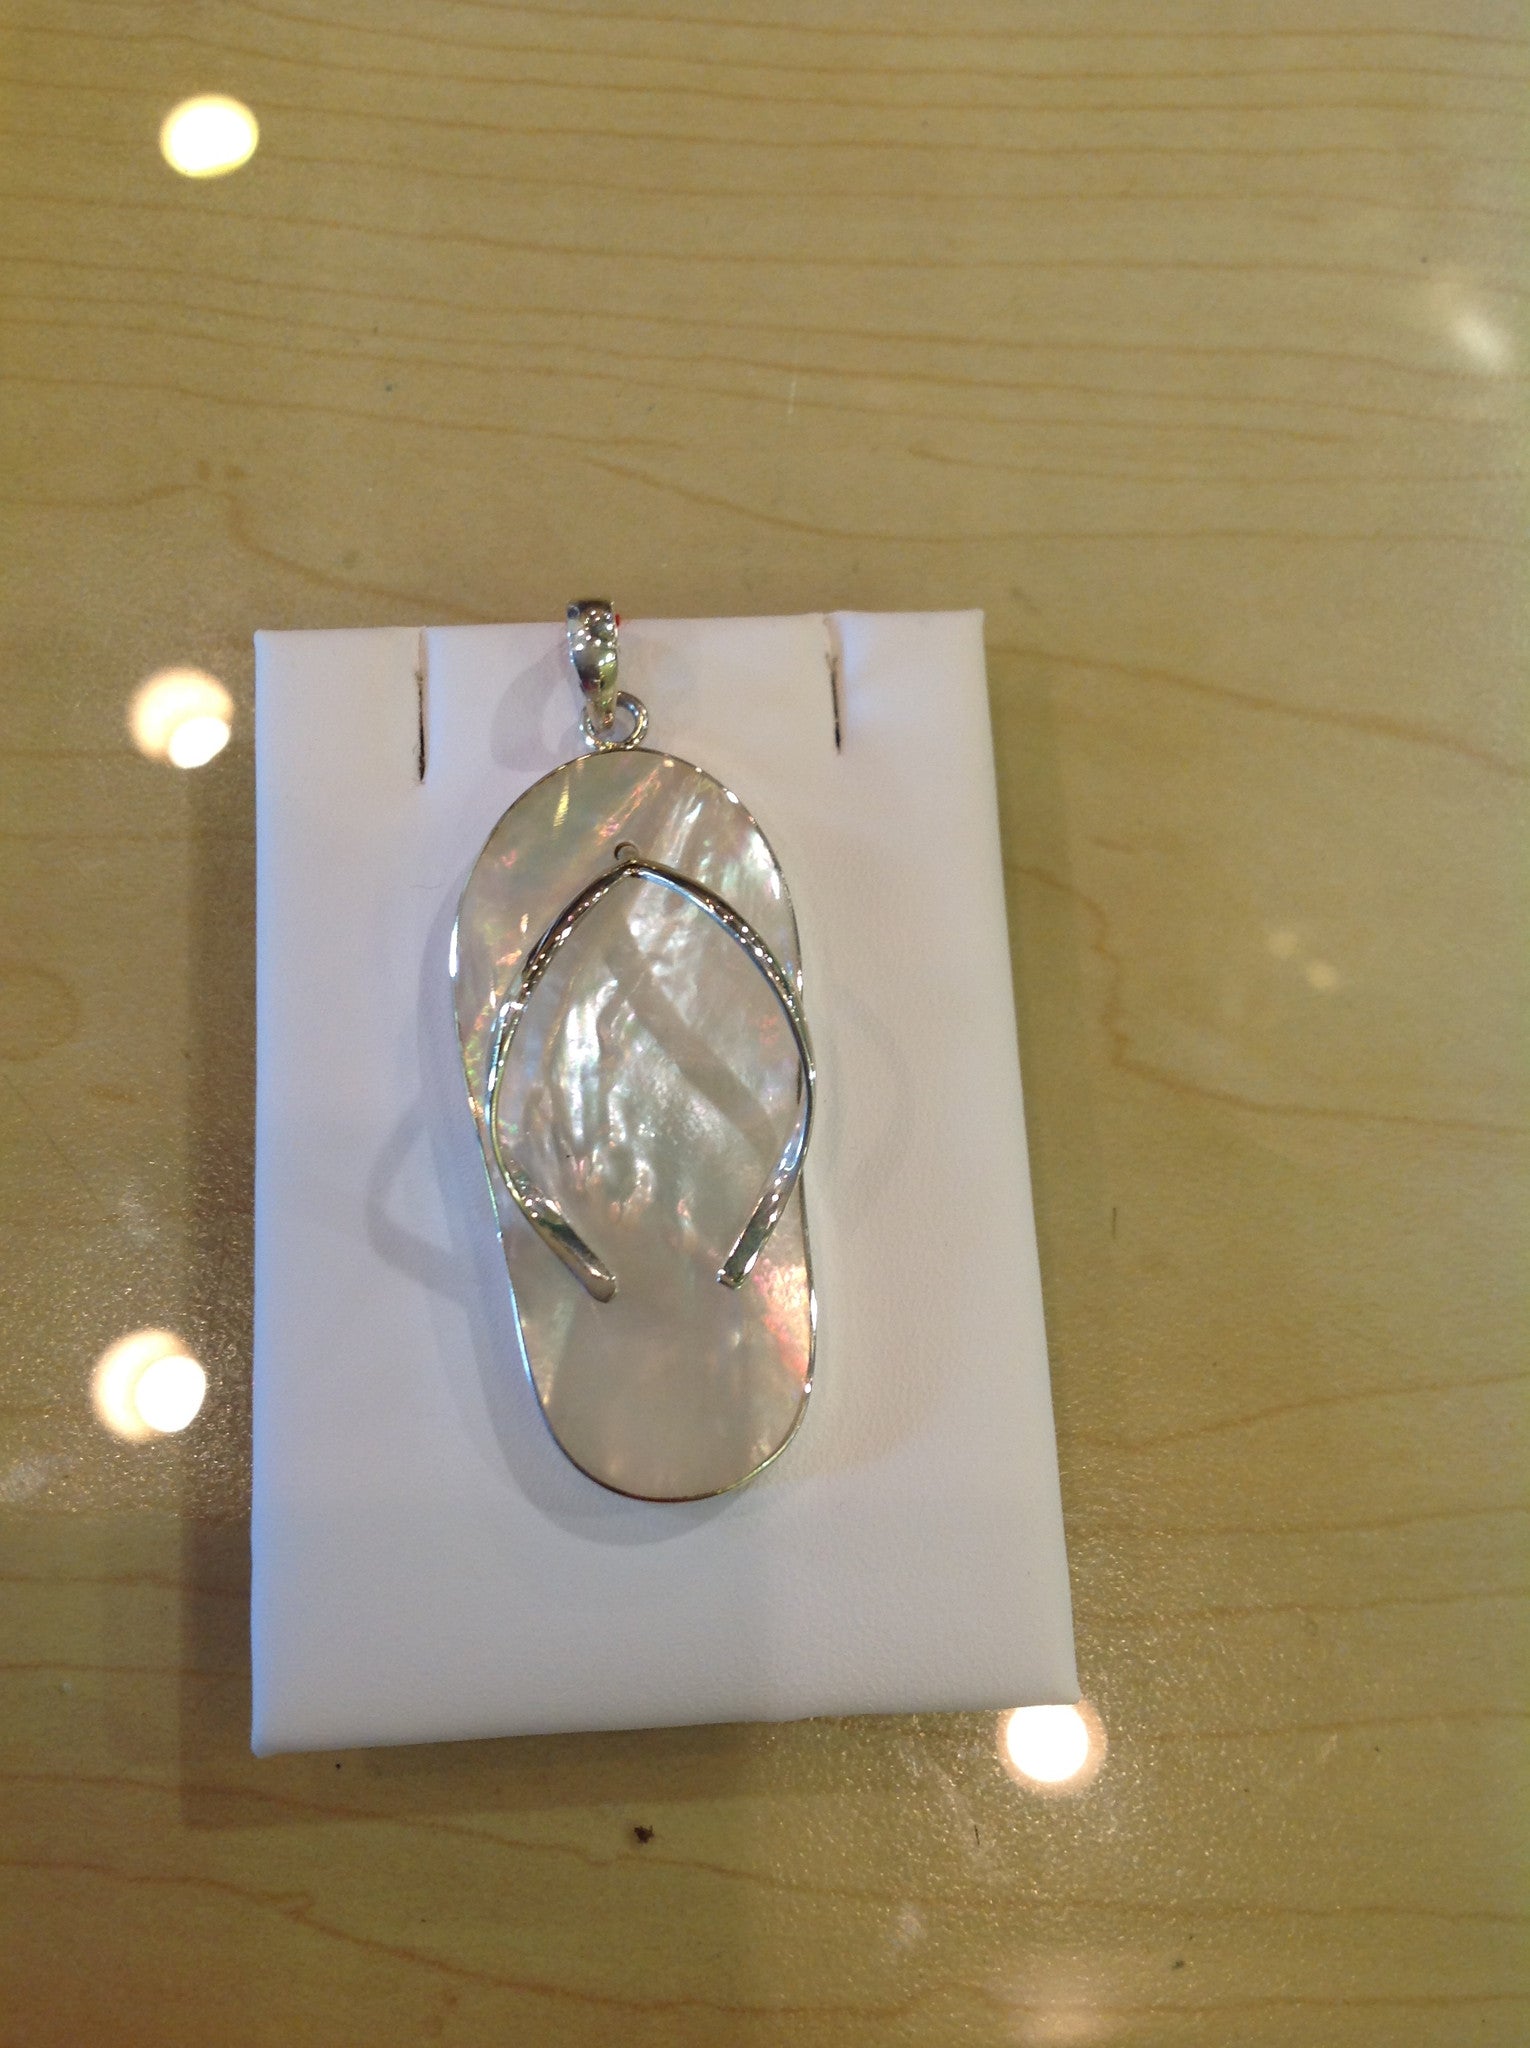 Sandal Mother of Pearl and Sterling Silver Pendant - Klara Haloho